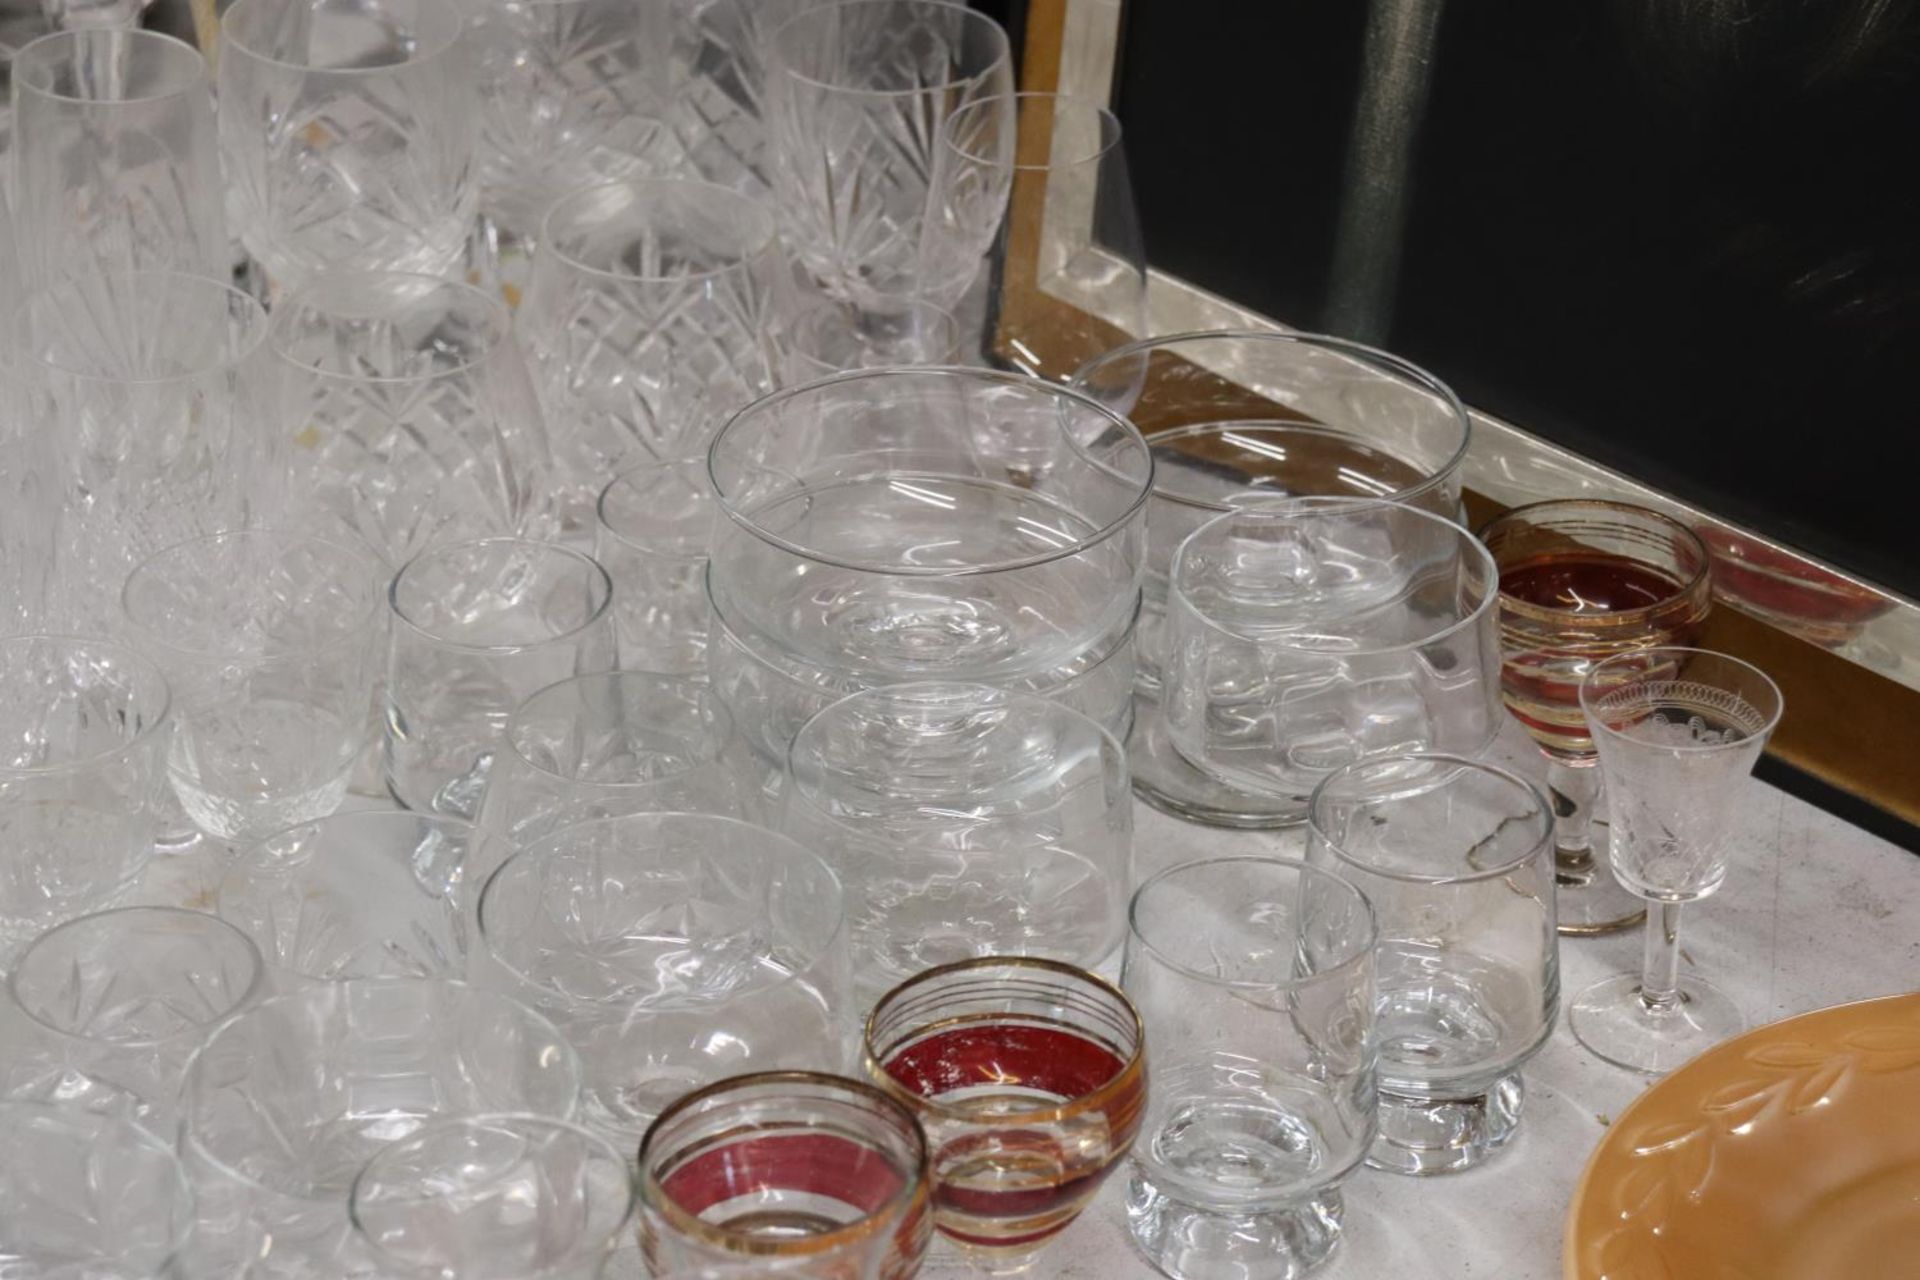 A LARGE QUANTITY OF GLASSES TO INCLUDE CHAMPAGNE FLUTES, WINE, SHERRY, TUMBLERS, DESSERT BOWLS, ETC - Image 5 of 6